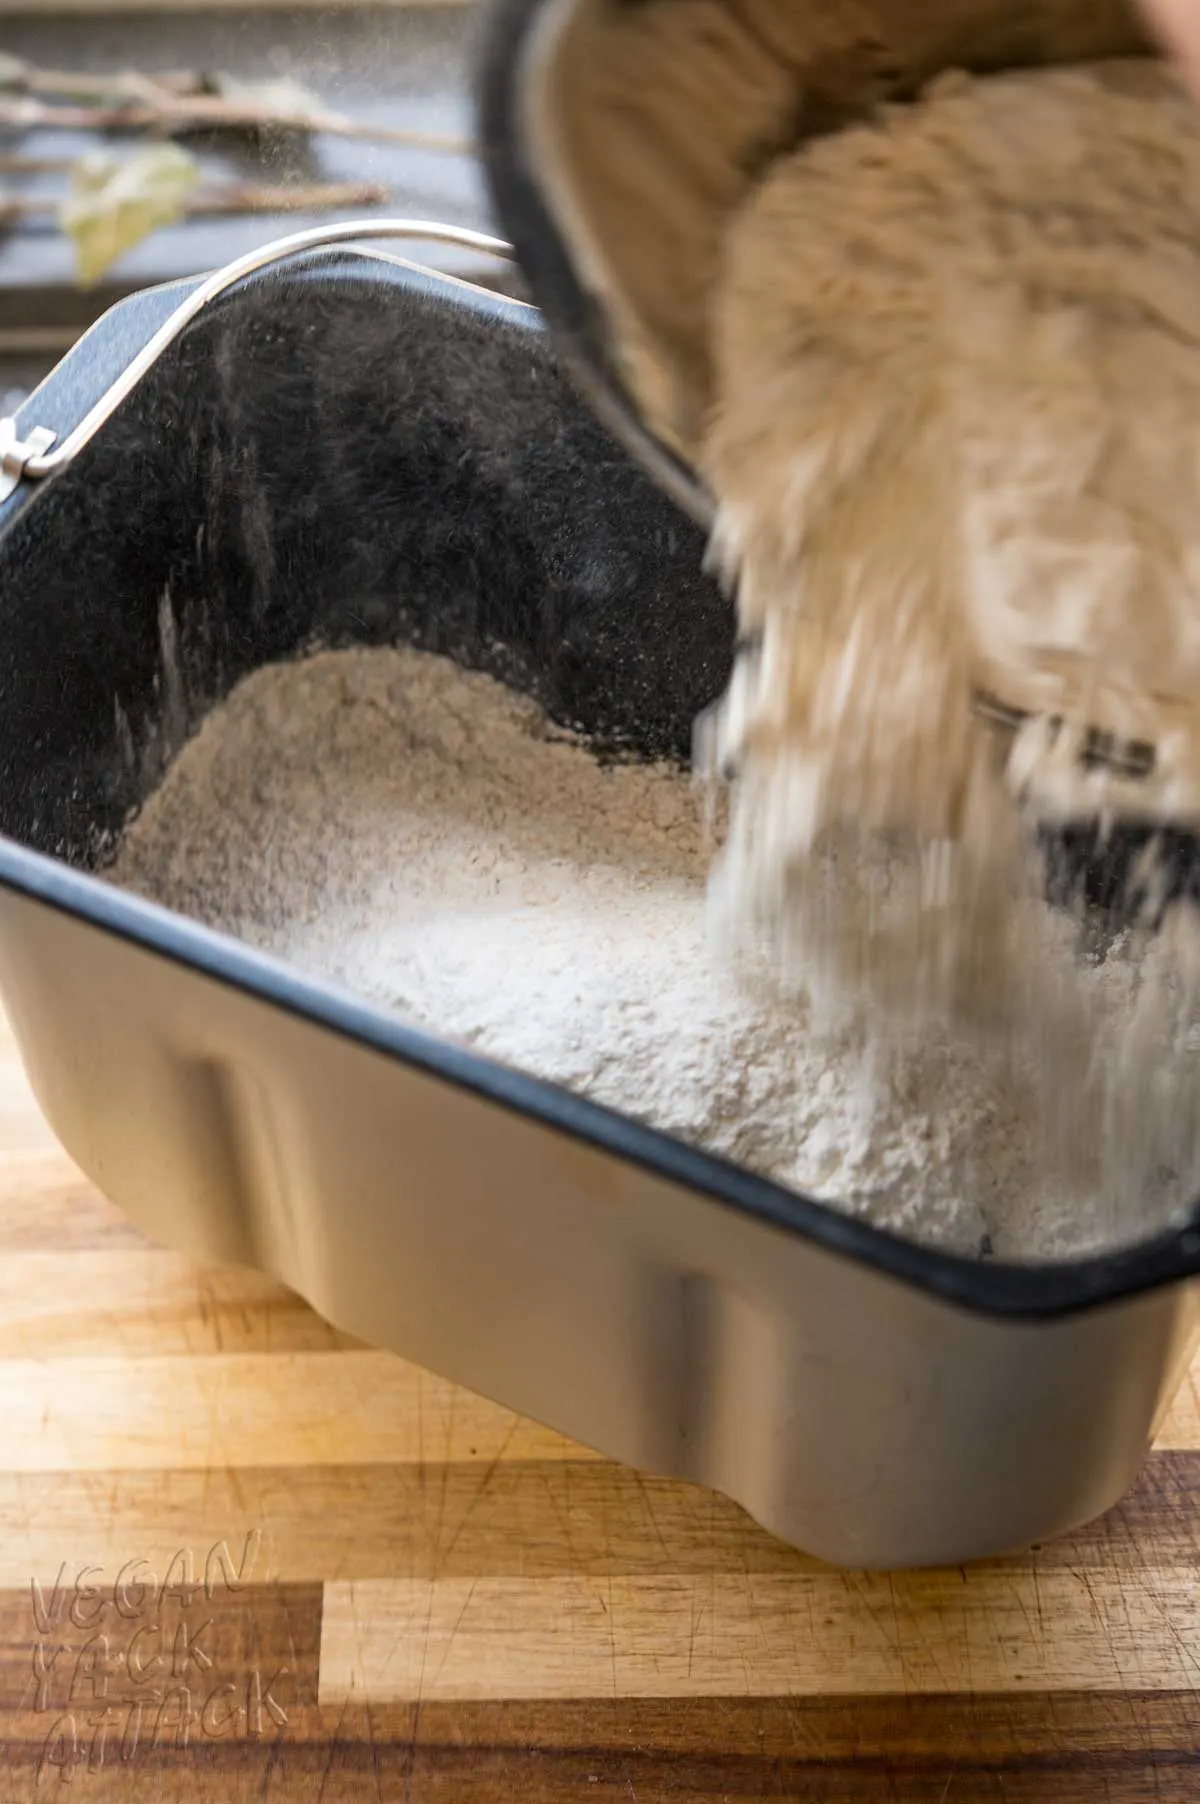 flour being added to bread machine pan